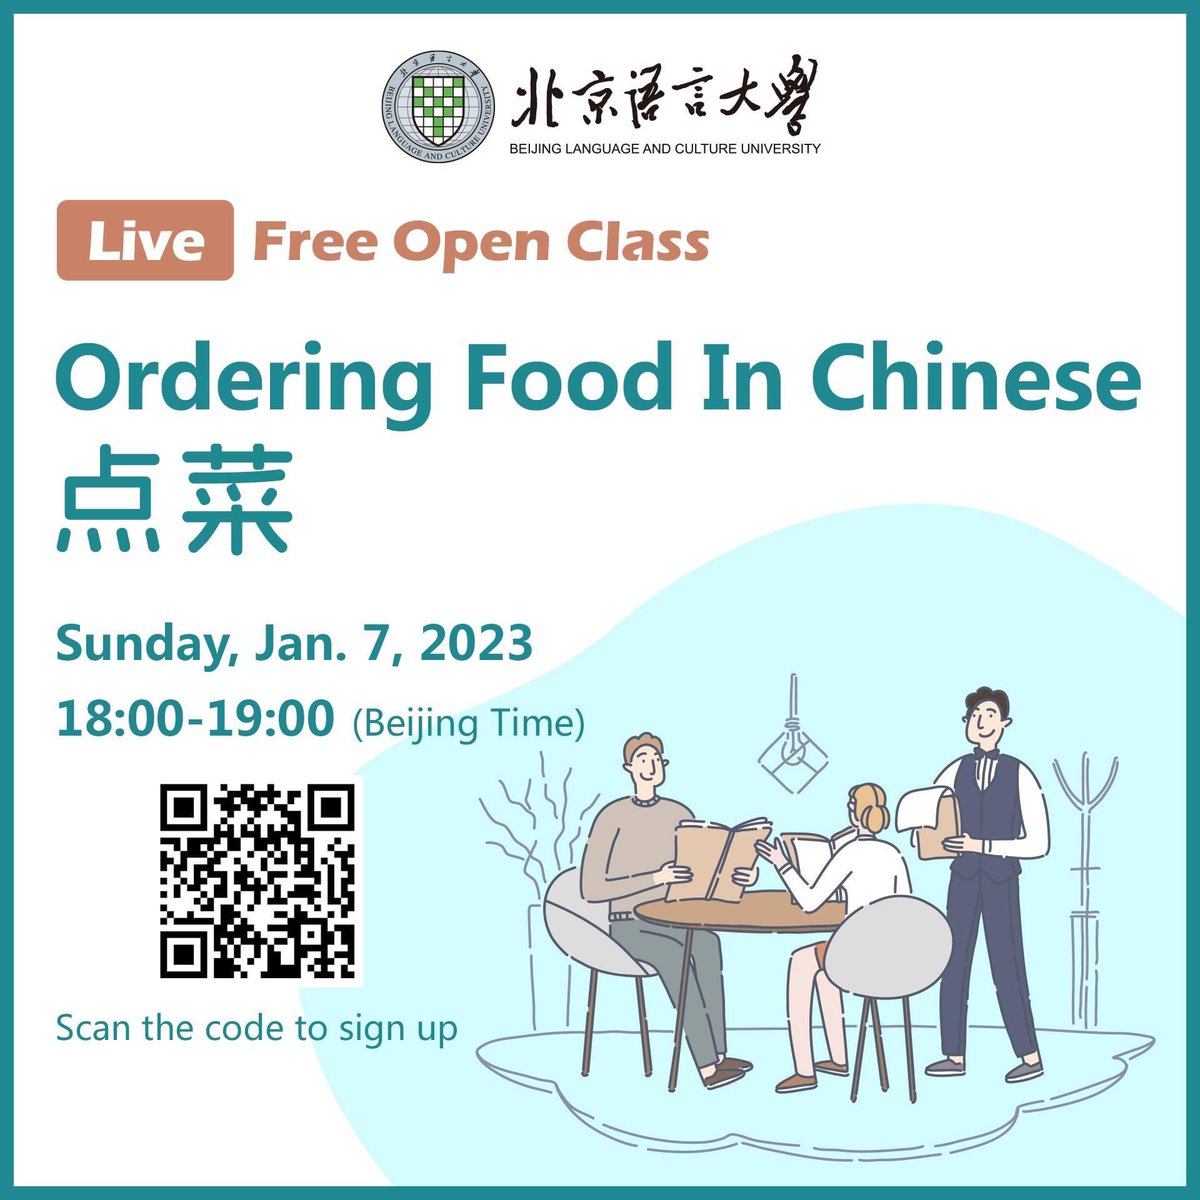 Free Open Class:
📖Topic: Ordering food in Chinese
⏰Time: 7th Jan. 18:00-19:00 Beijing Time
📌Please scan the QR code in the picture or click the link below to register.
wjx.cn/vm/tBmwTpF.aspx
#learnchinese #chineselanguage #chineselearning #freechineseclass #onlinechineseclass